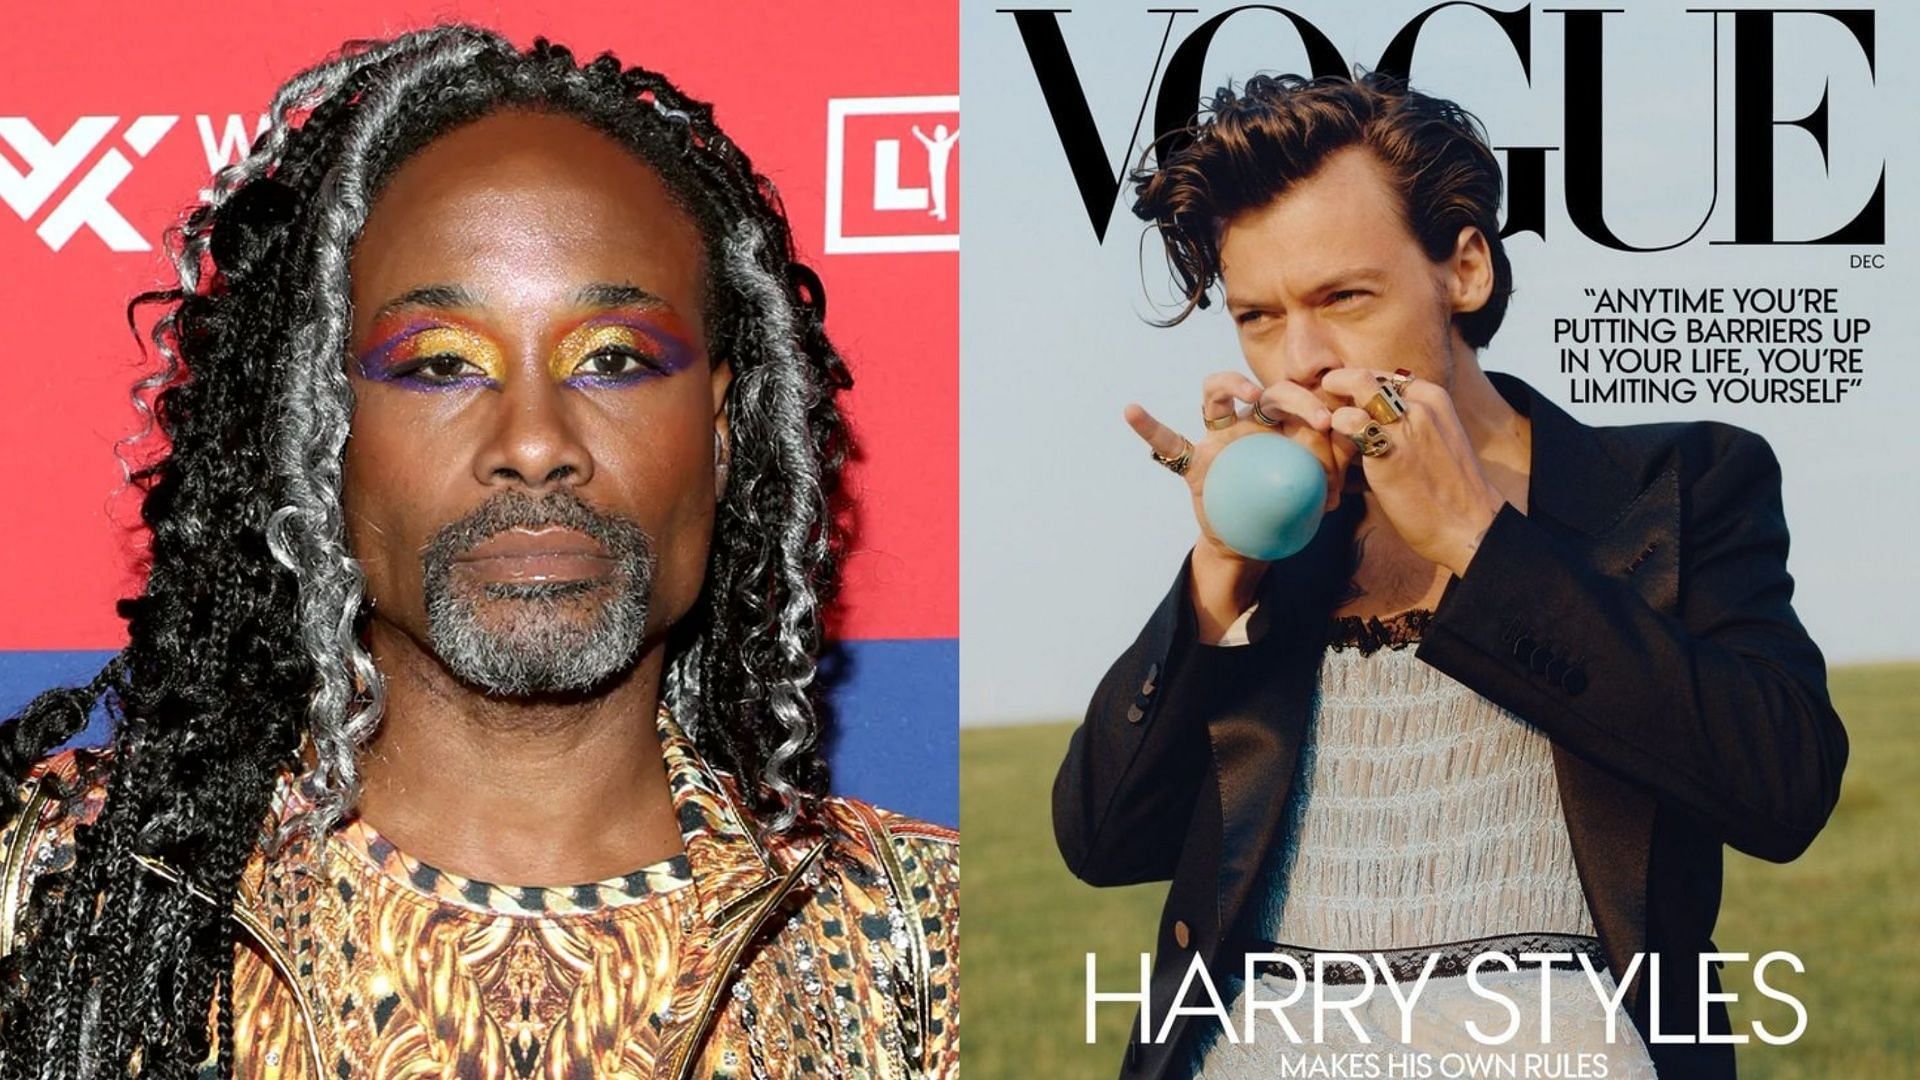 Billy Porter and Harry Styles. (Photo via Getty Images, @pineaplestyless/Twitter)